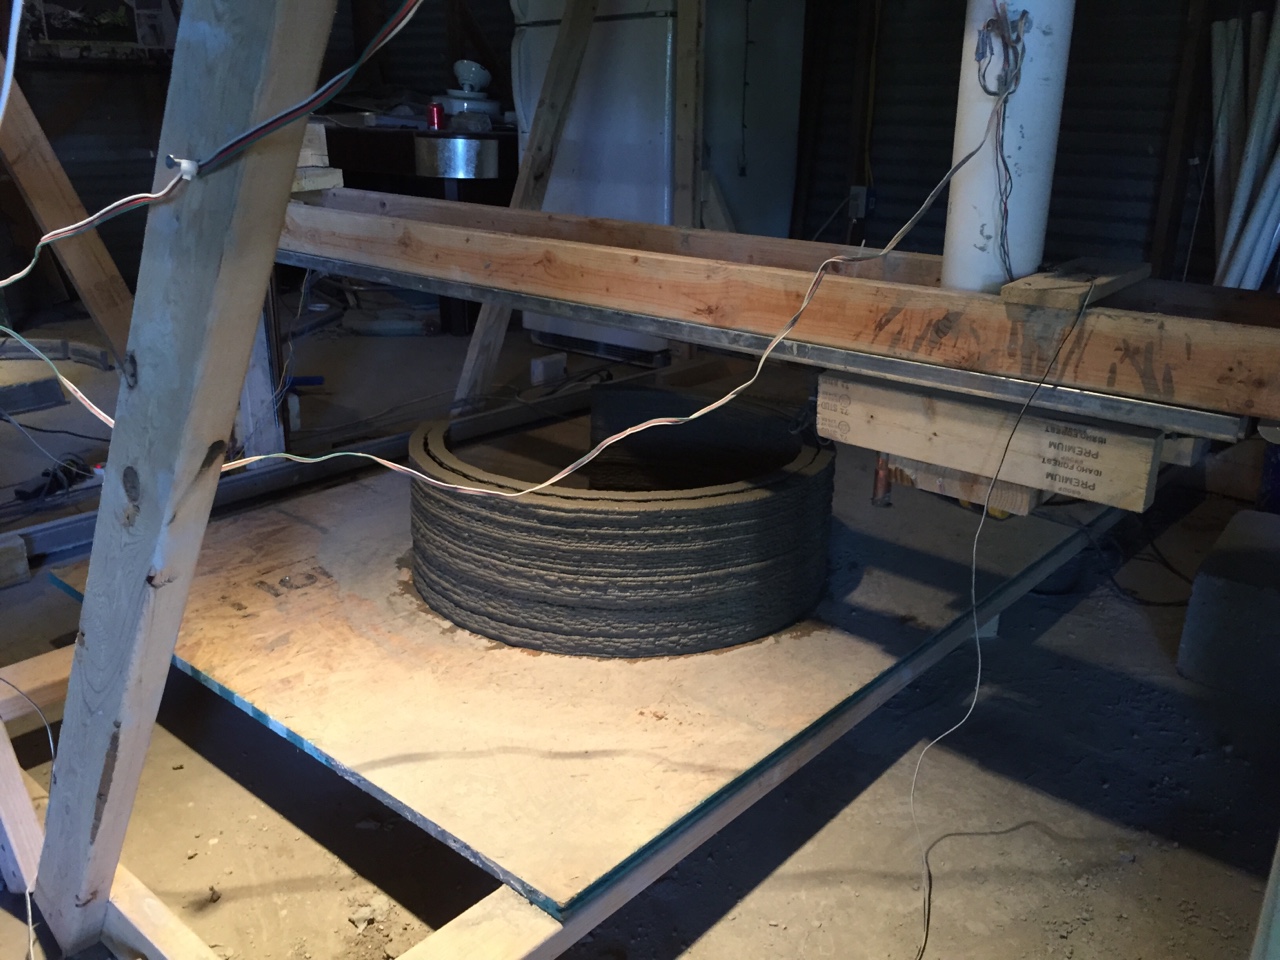 Texas Student Builds Concrete 3D Printer - 3D Printing Industry